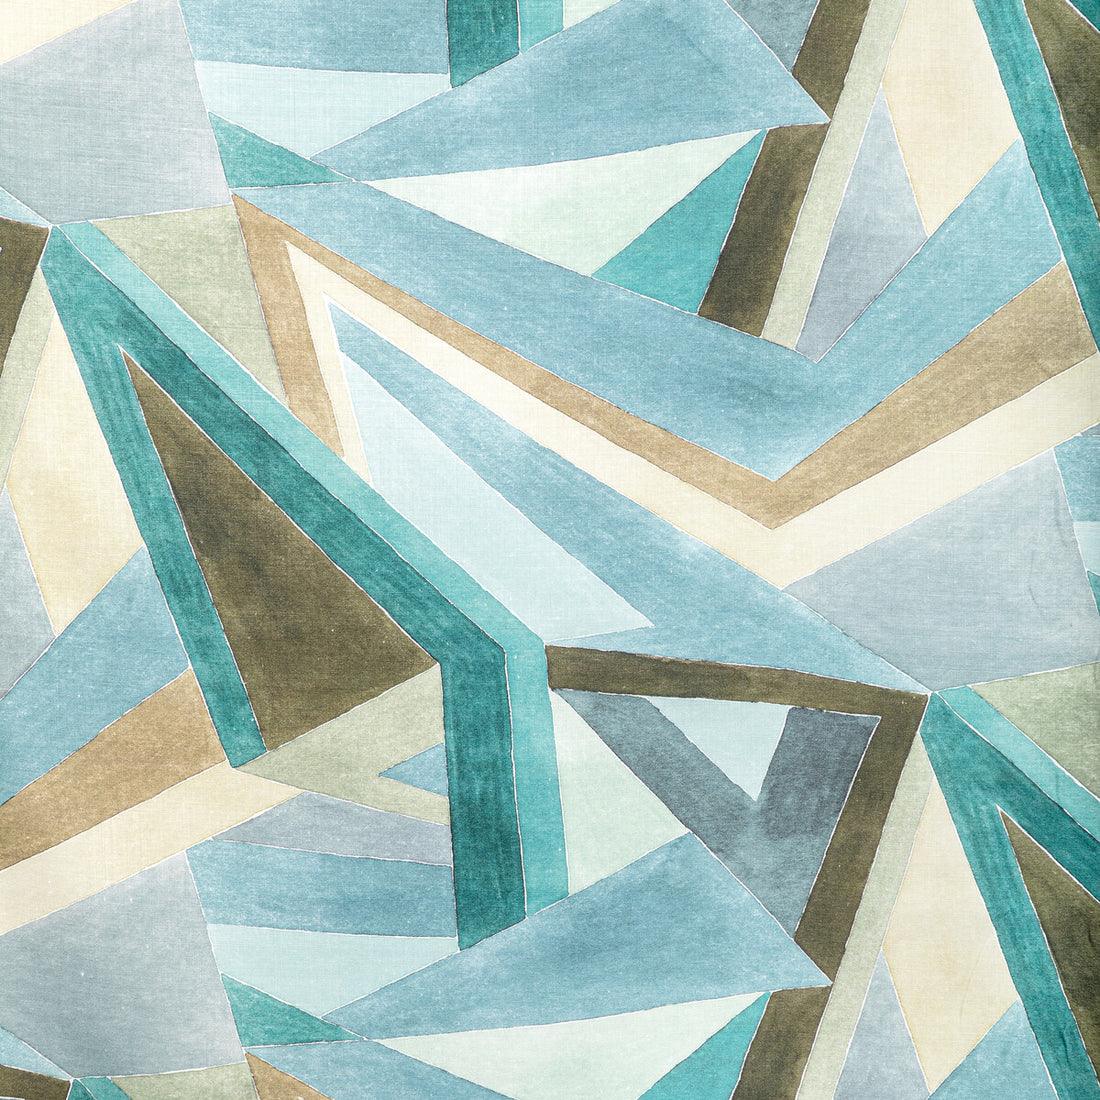 Roulade Print fabric in aqua/dune color - pattern GWF-3772.635.0 - by Lee Jofa Modern in the Rhapsody collection